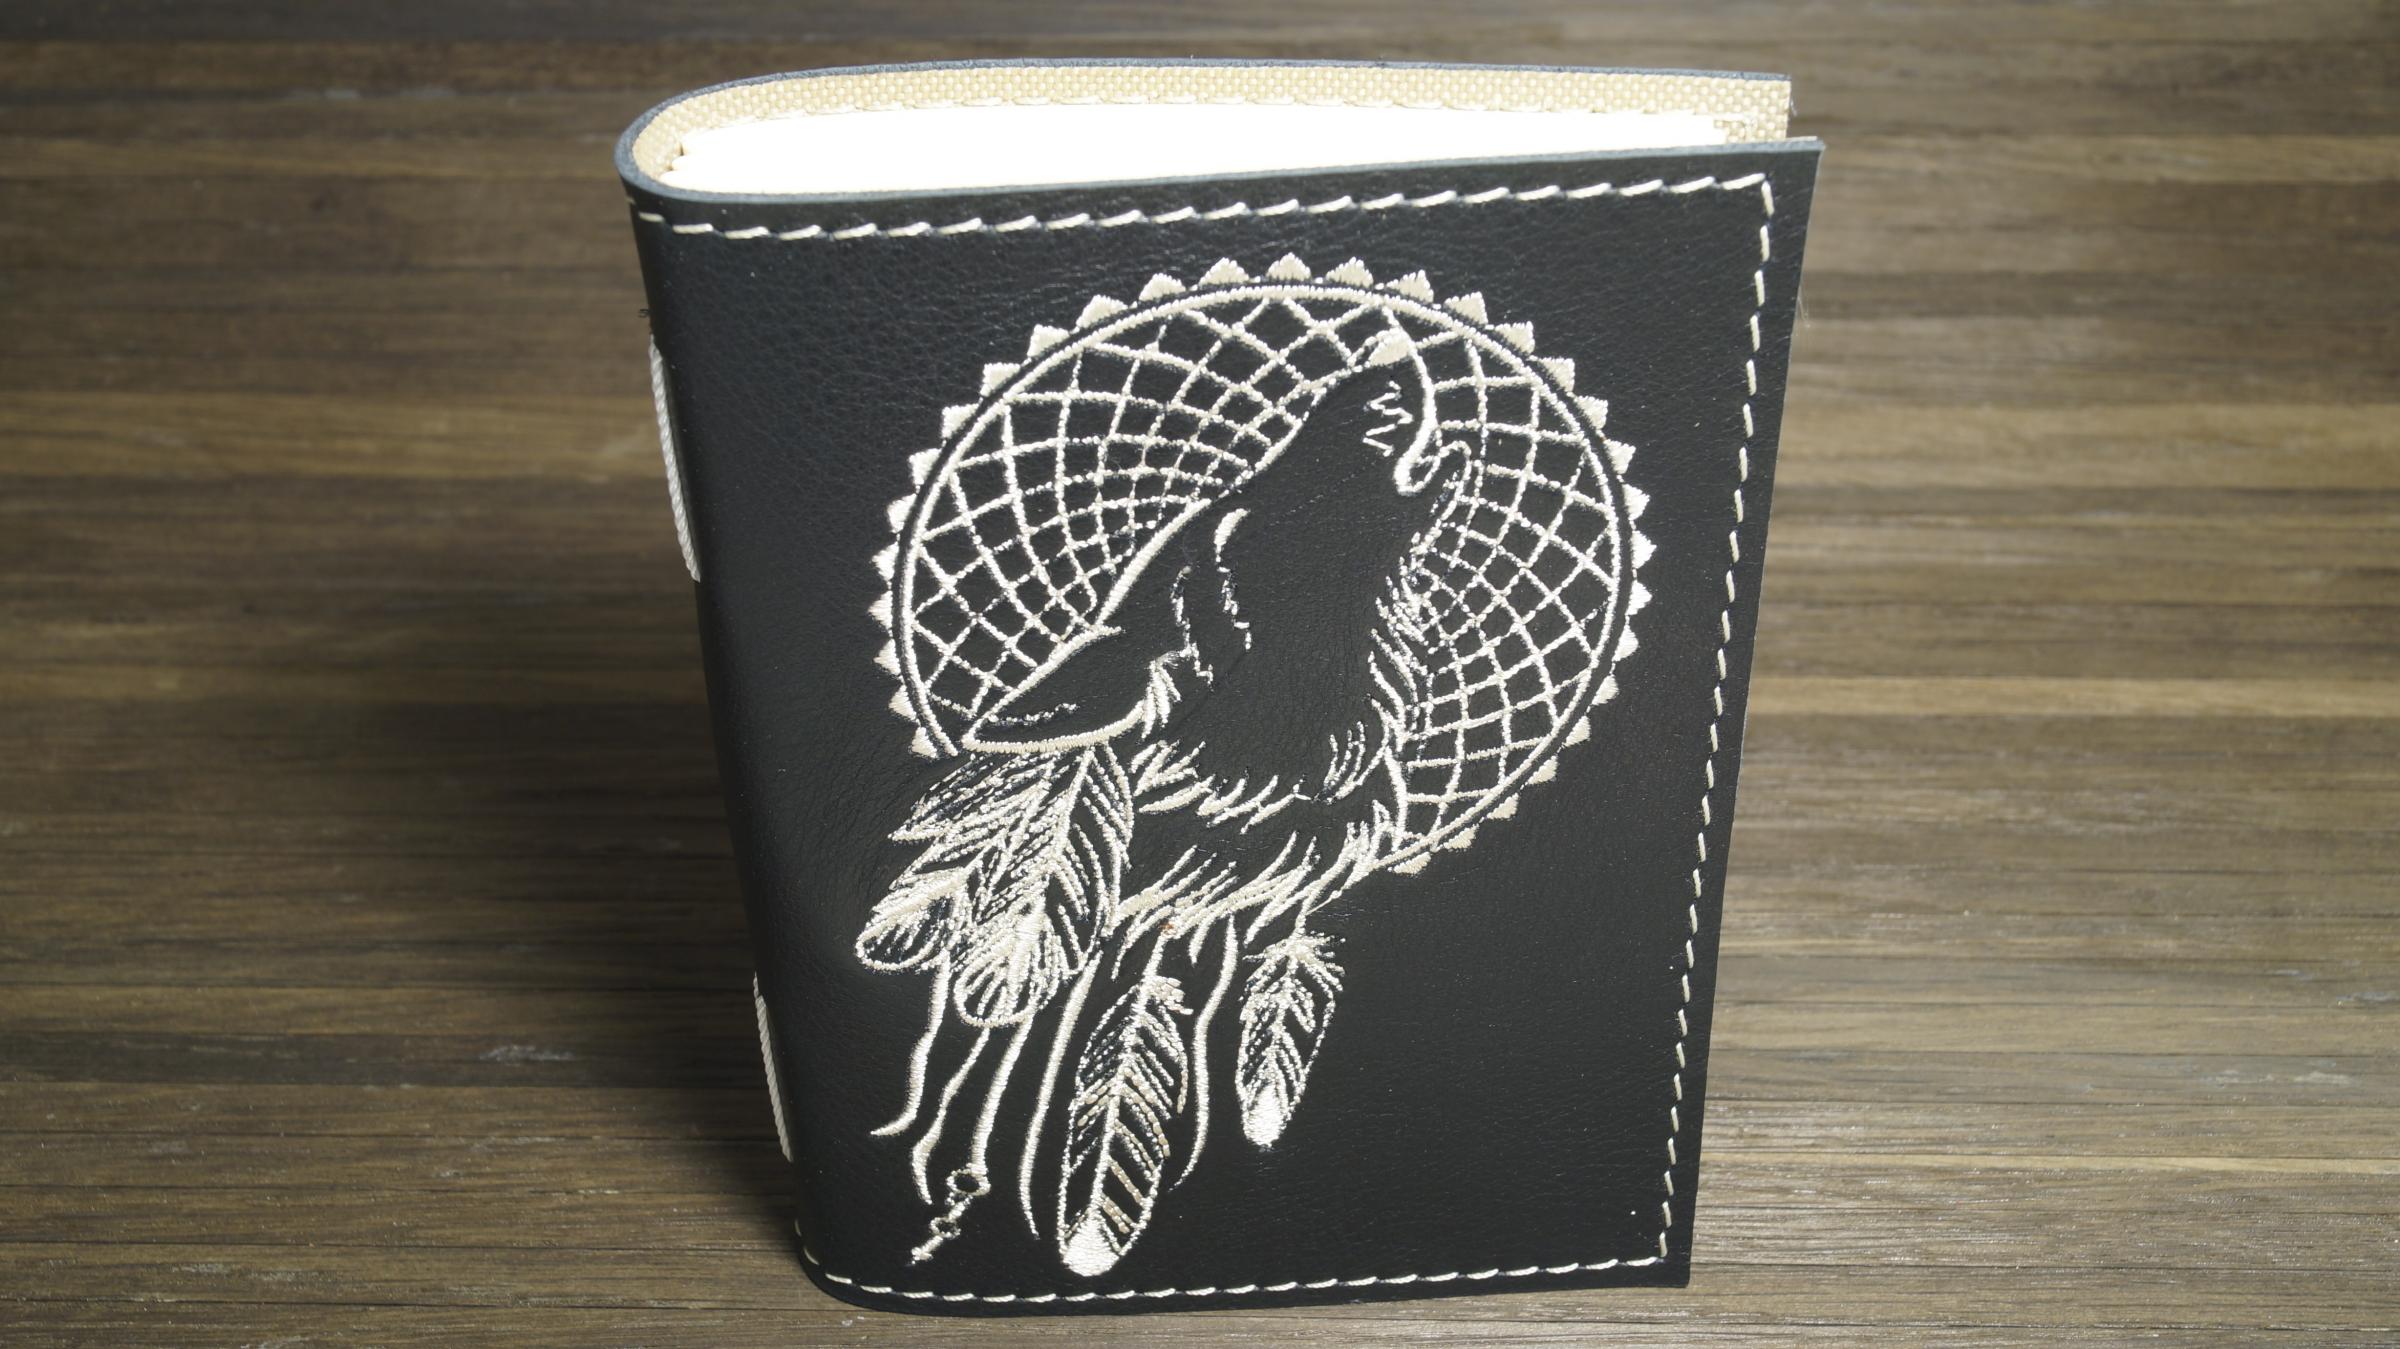 Embroidered cover with Wolf dreamcatcher design